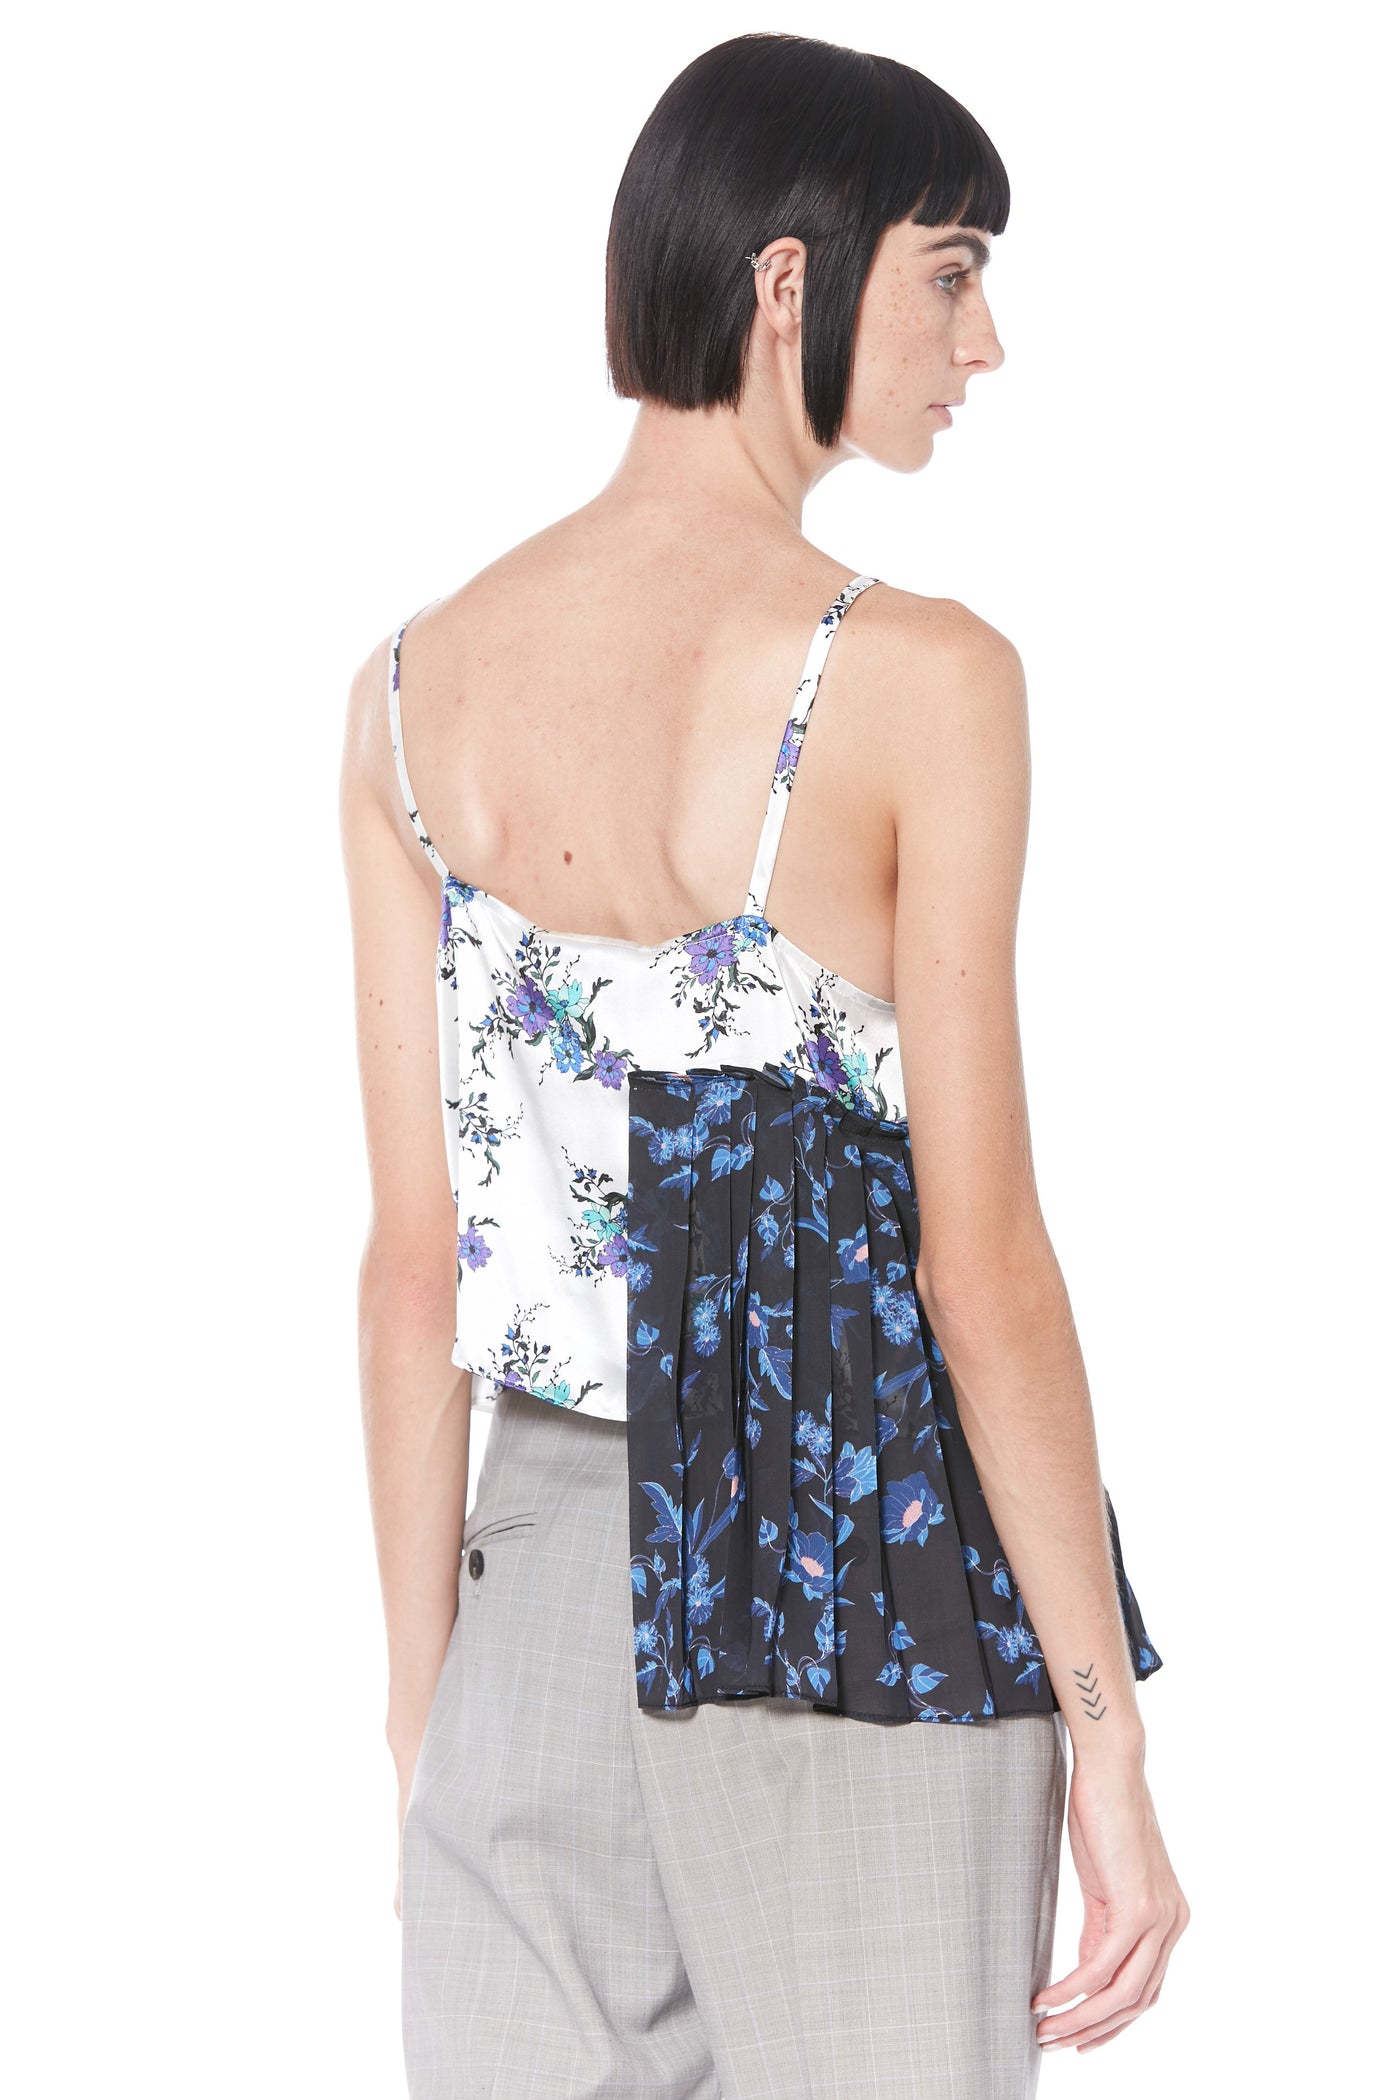 Silk Printed Blue Floral Camisole Top